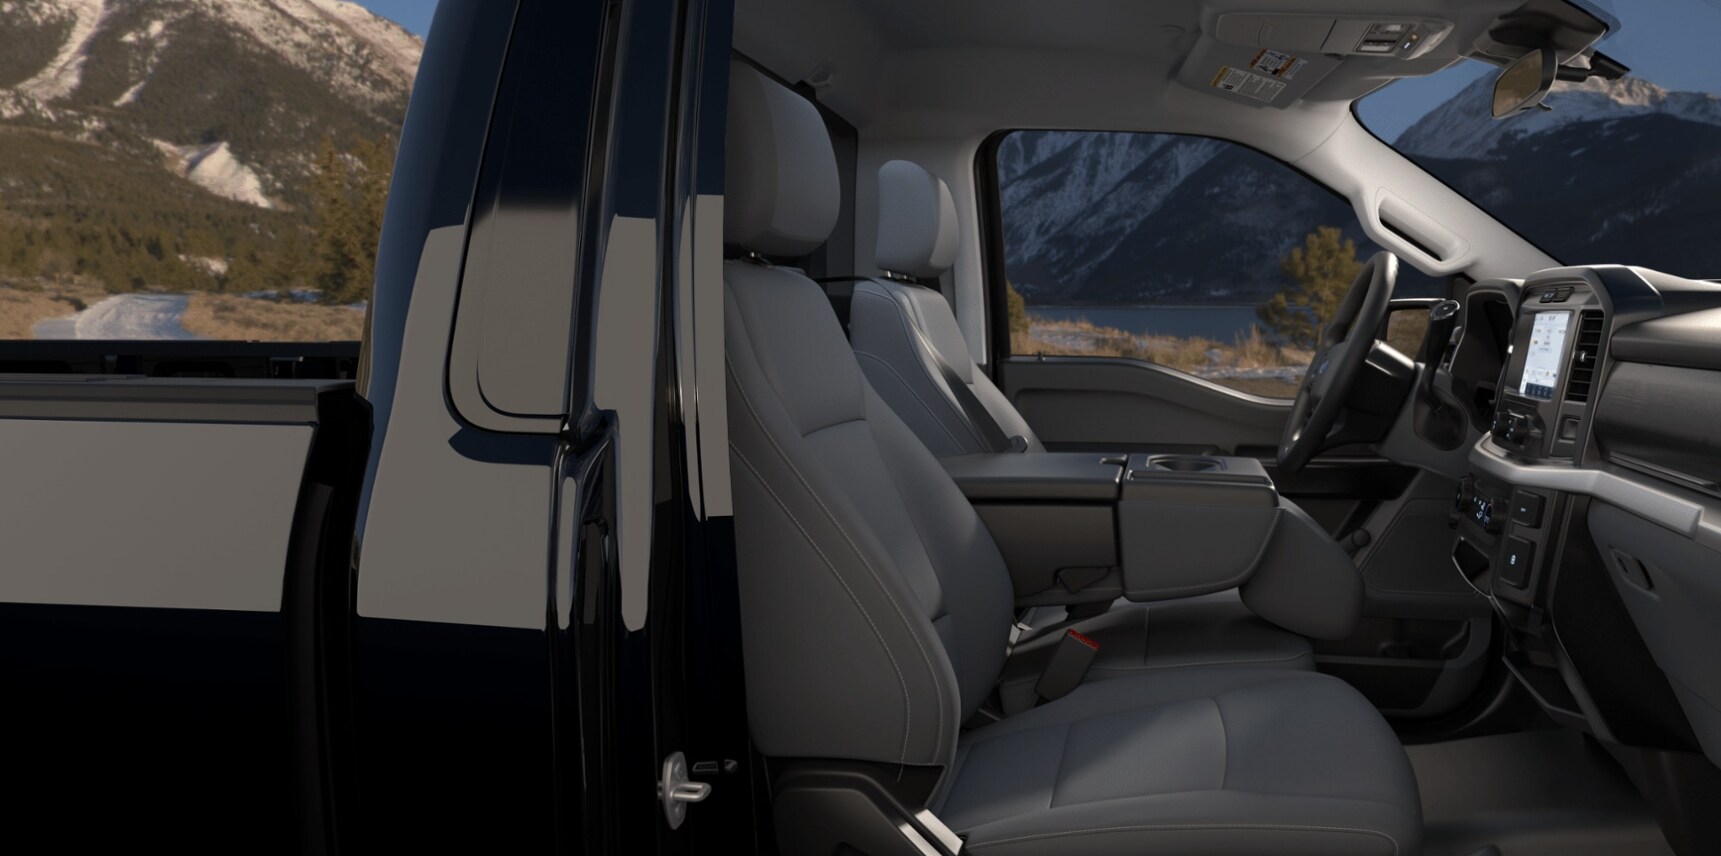 The luxurious interior of the Ford F150 is shown and has gray leather seats and center console and polished dashboard